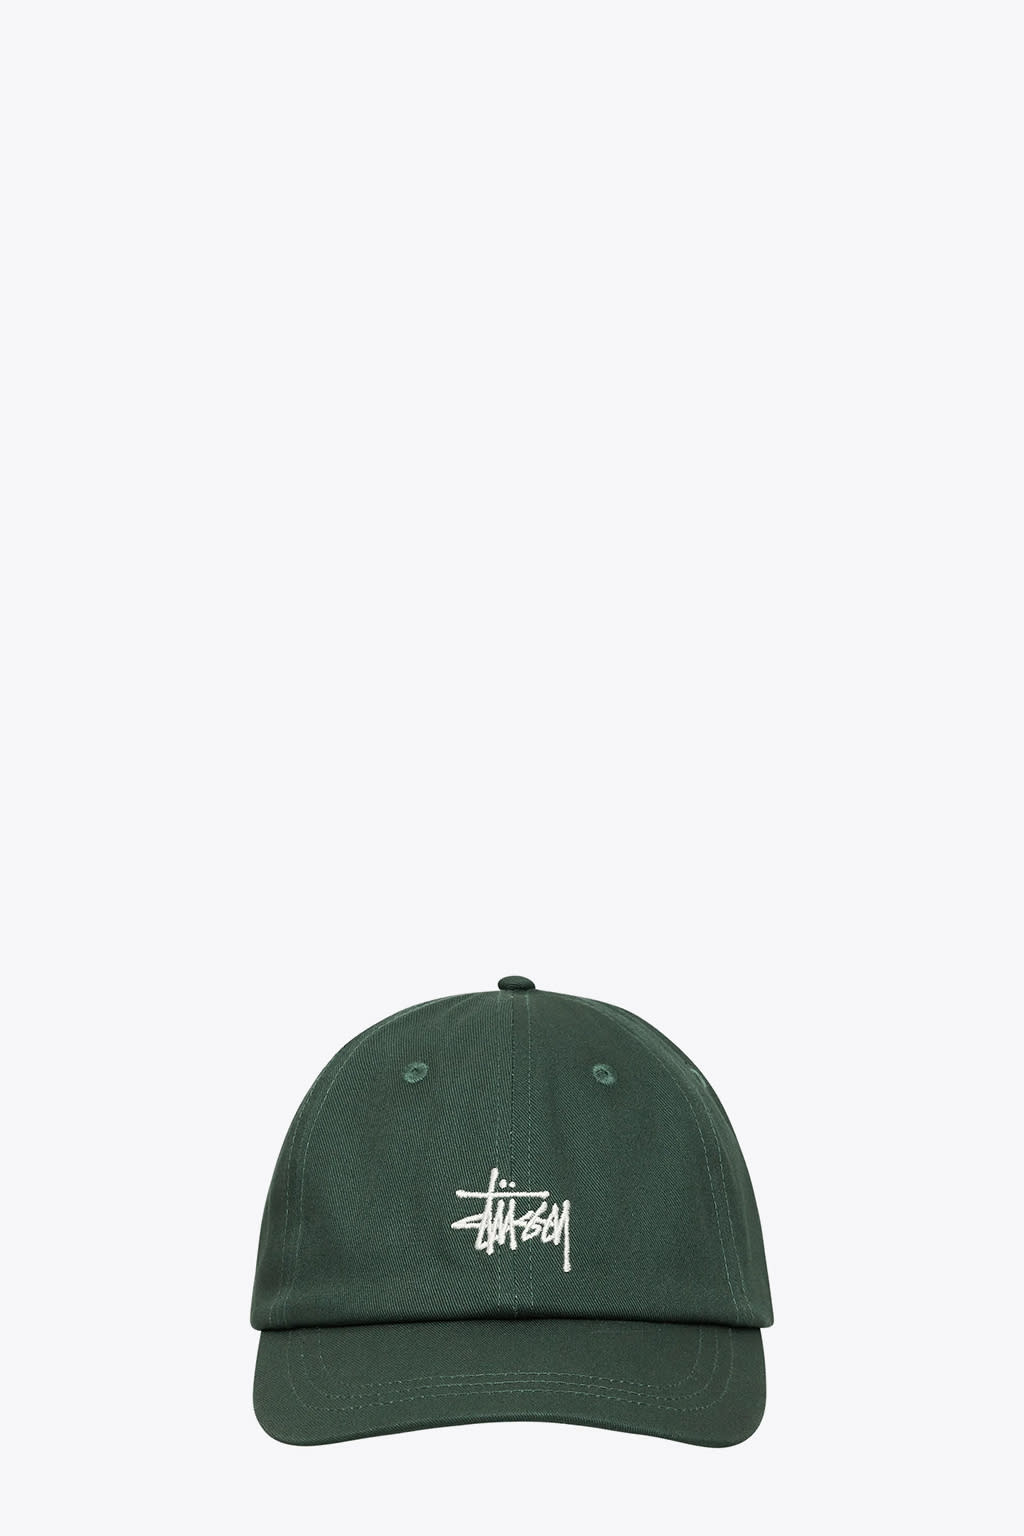 Stussy Basic Stock Low Pro Cap Green cap with logo embroidery - Basic stock low pro cap